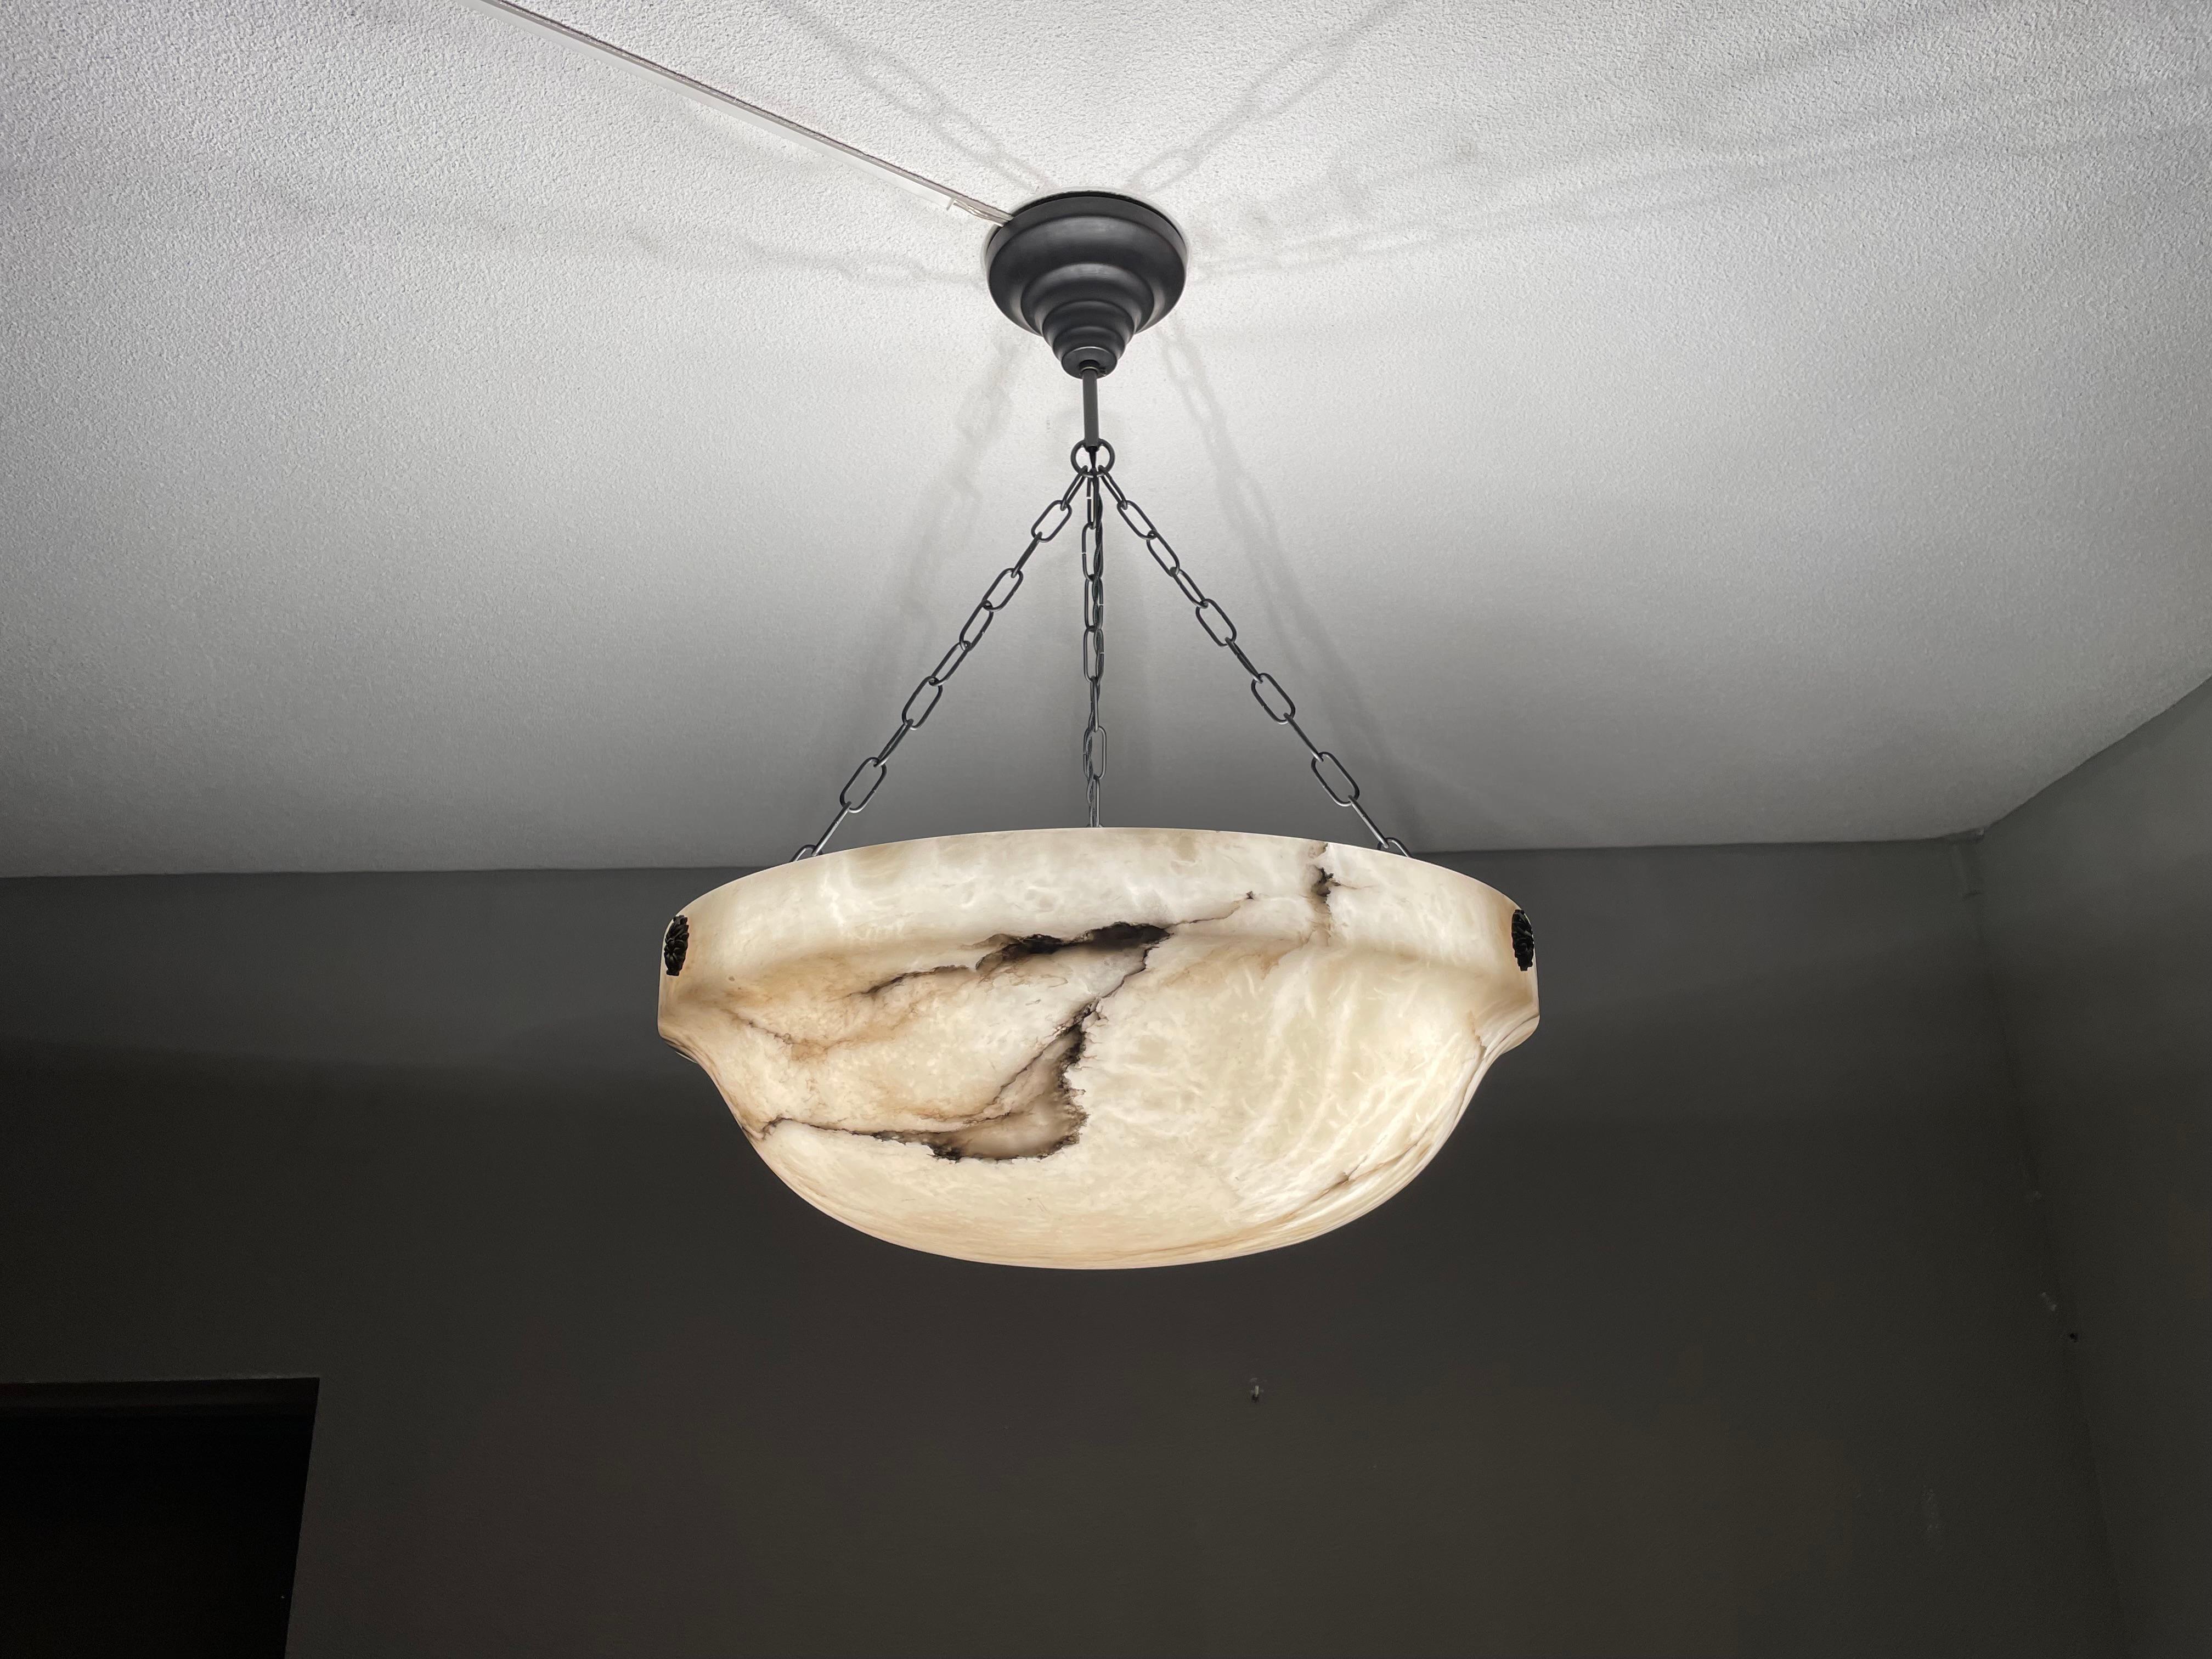 Antique and large alabaster chandelier.

Thanks to its large size, its truly deep bowl shade and its timeless design this three light alabaster chandelier too is bound to light up someone's days and evenings soon. It is in good condition and the